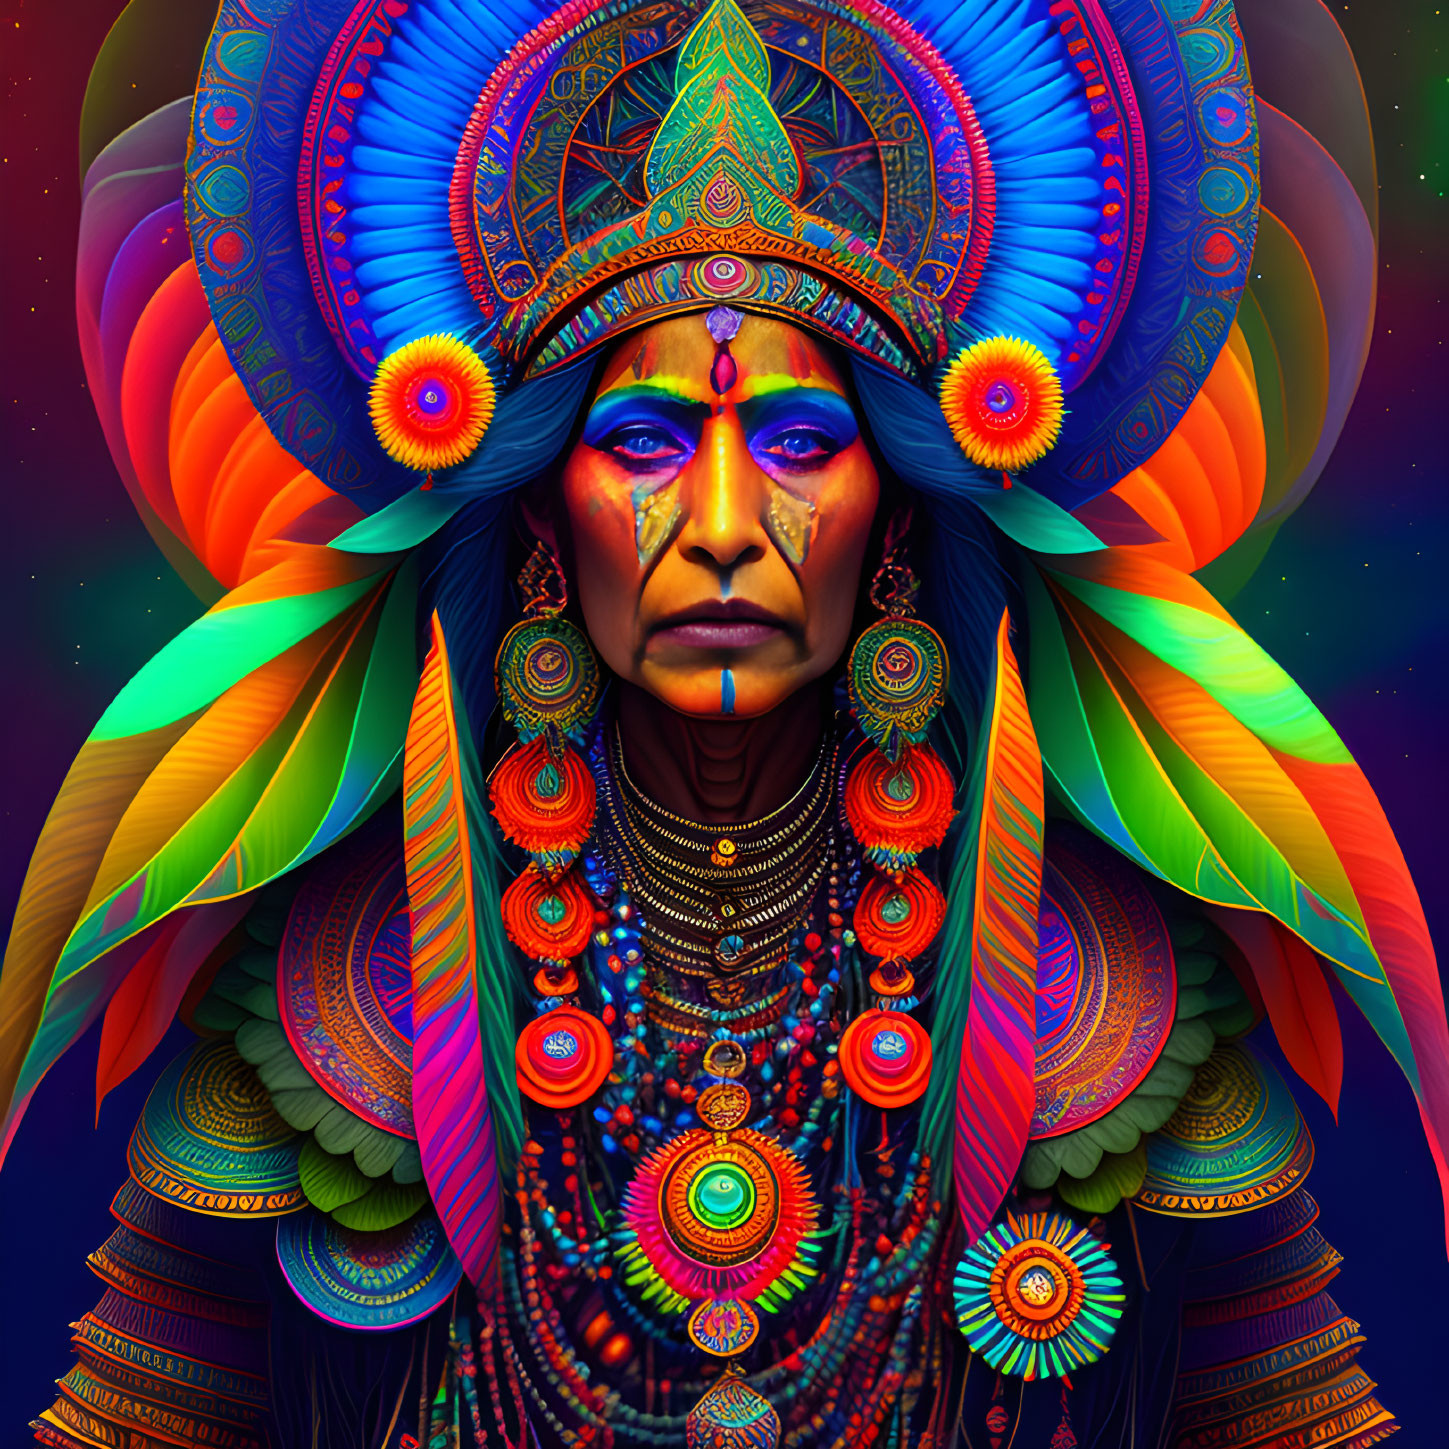 Colorful digital artwork of person in indigenous attire with feathered headdress